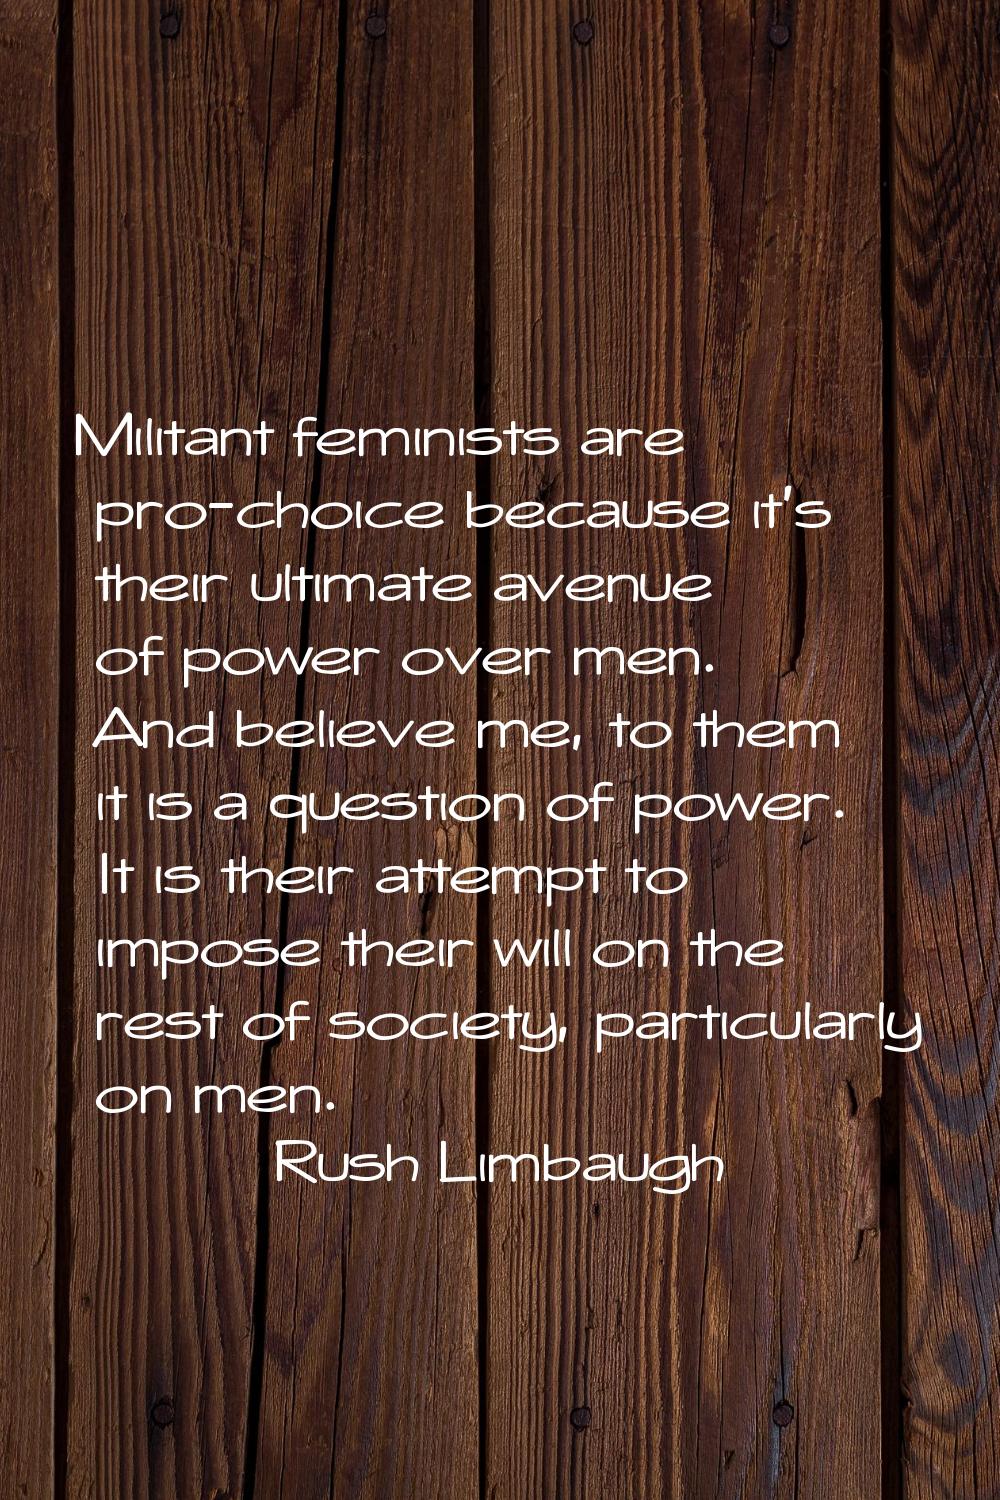 Militant feminists are pro-choice because it's their ultimate avenue of power over men. And believe